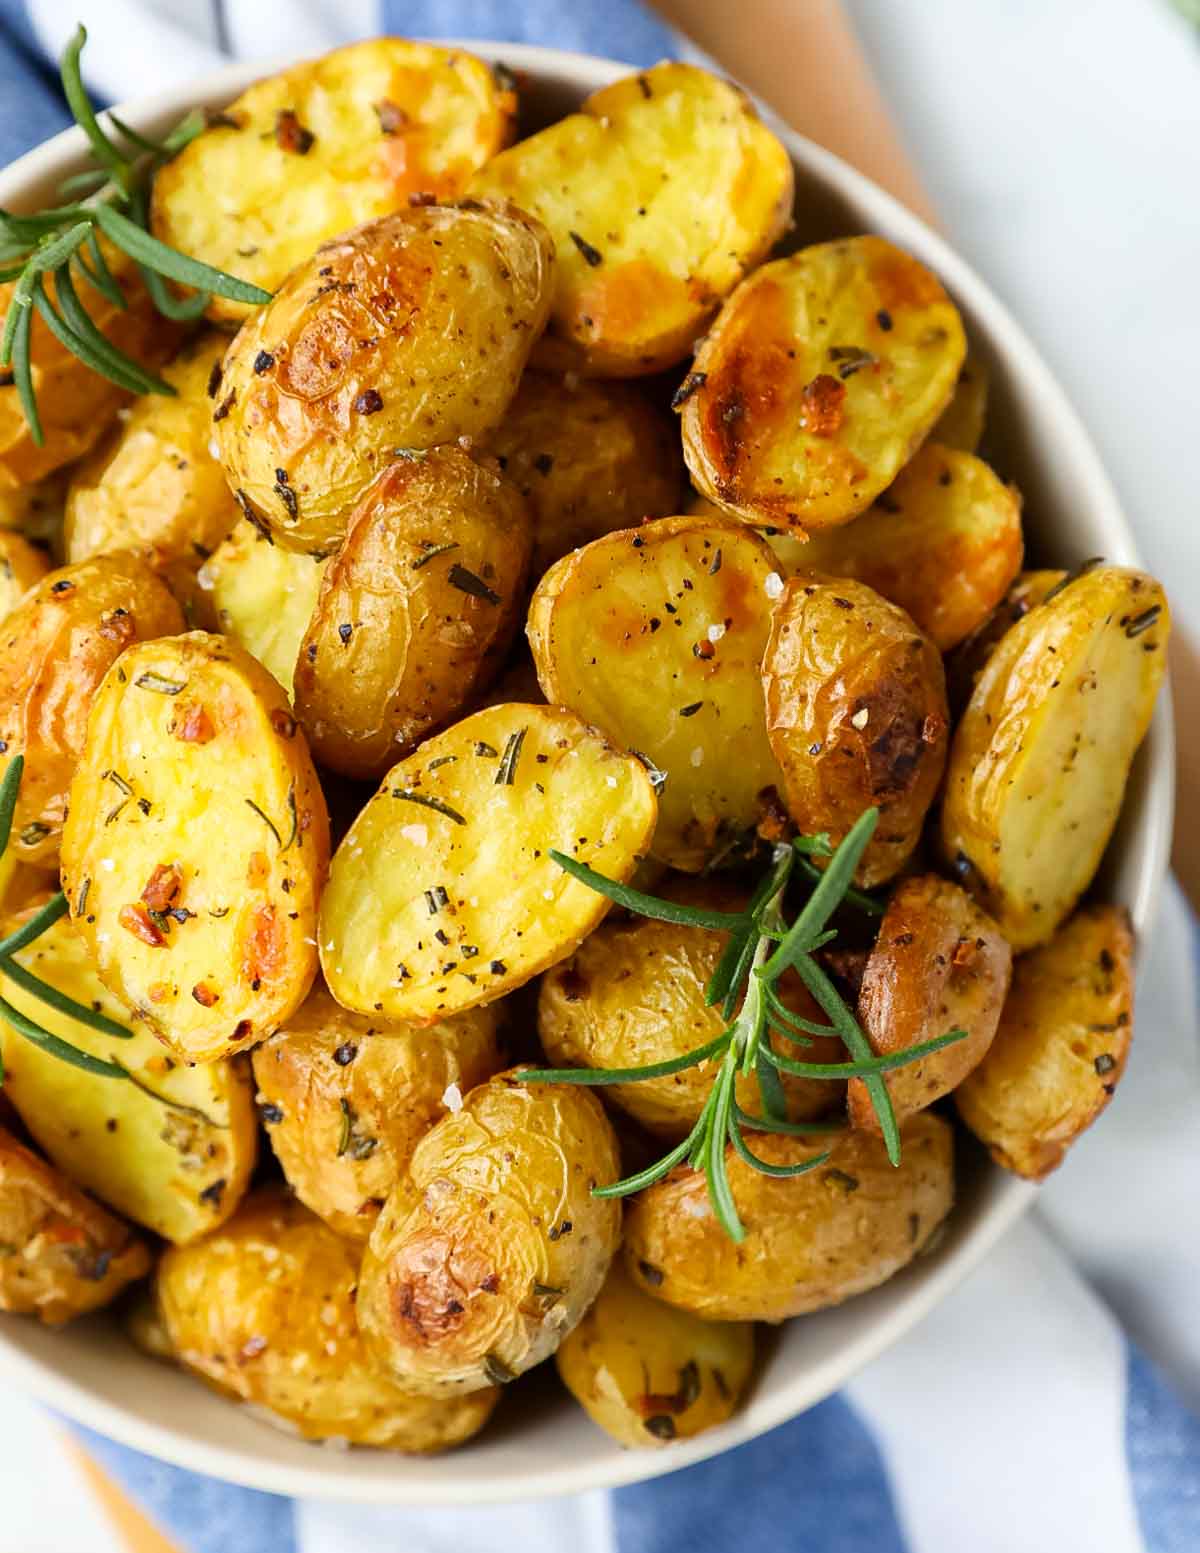 A close up image of sliced and roasted potatoes with seasoning on them inside of a bowl.